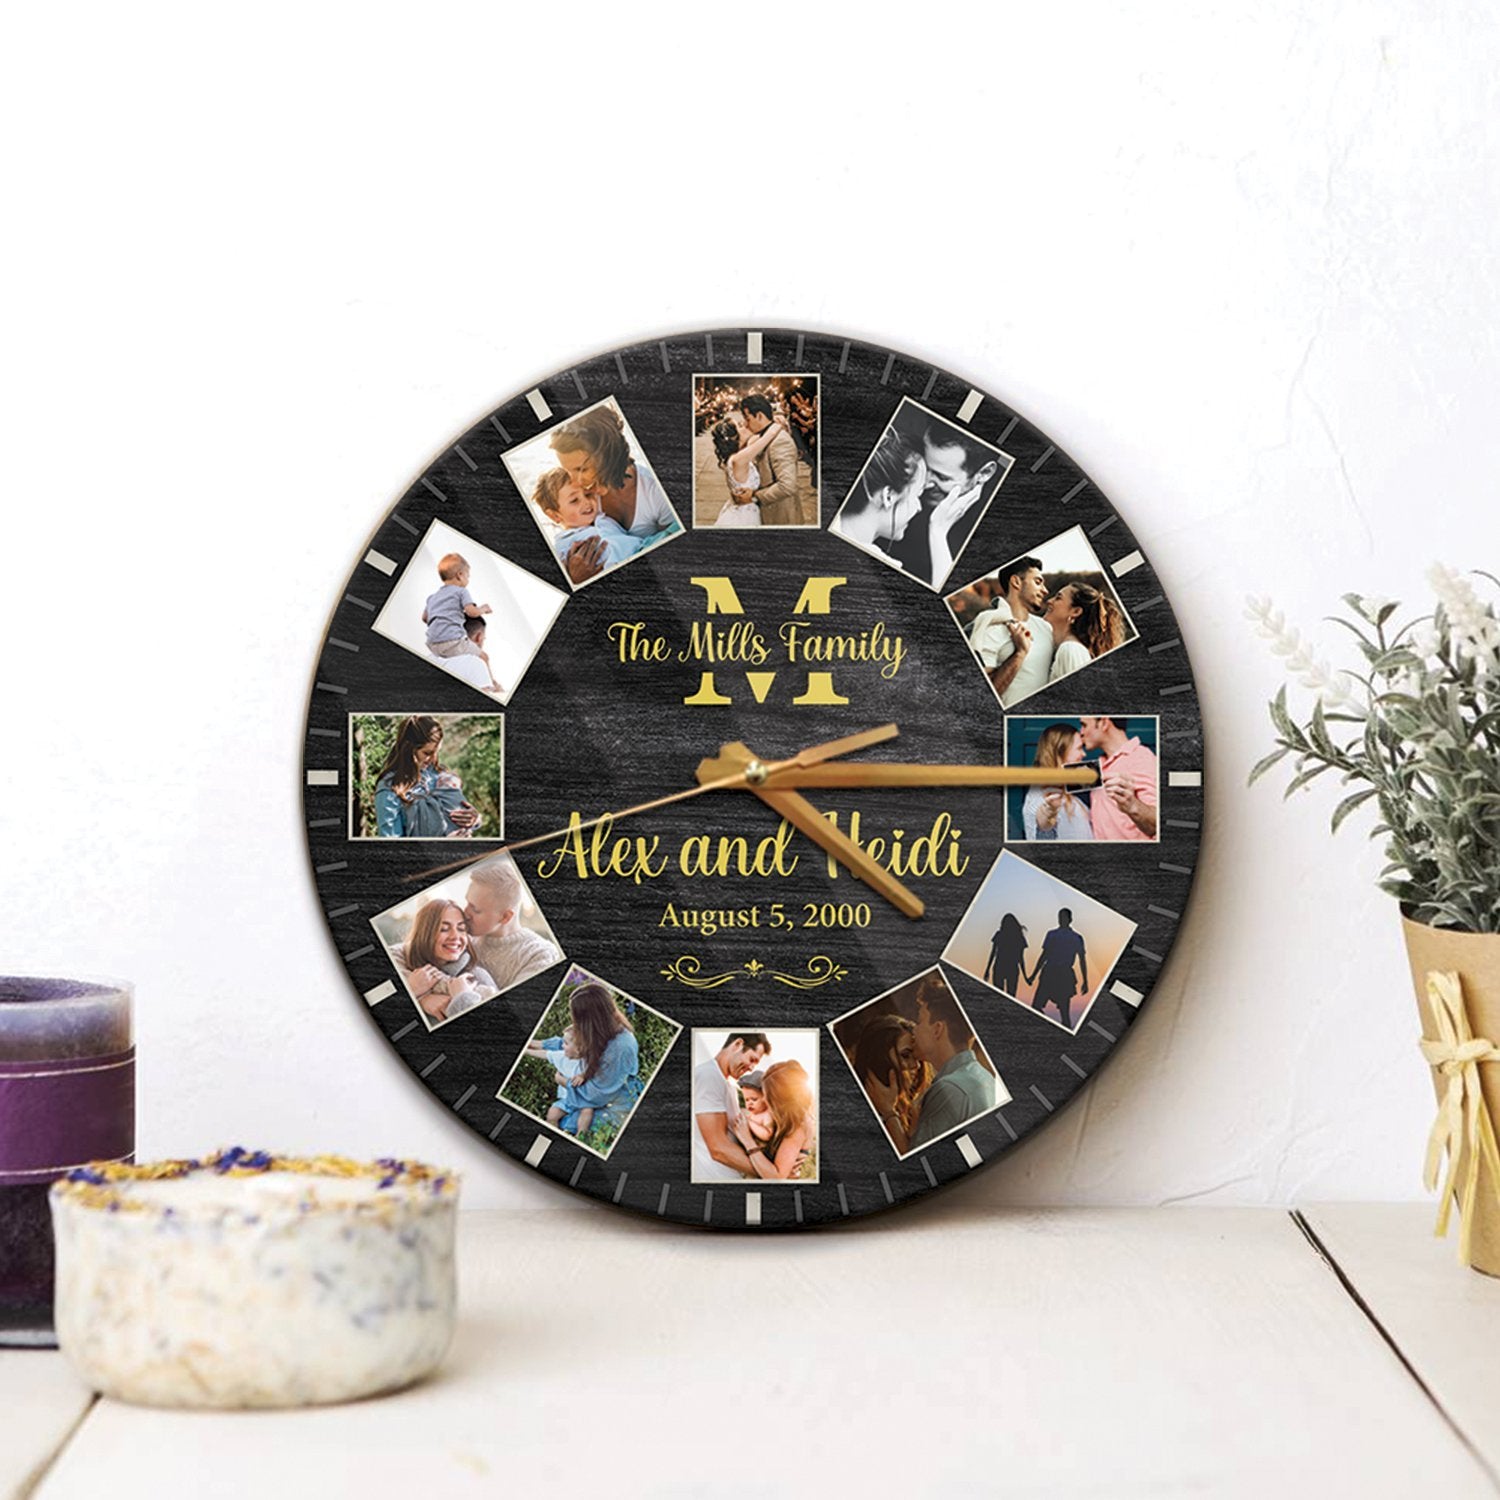 With a beautiful high gloss finish, this wall clock is sure to be a favorite home decor for your dad. You can customize with your photos, names and date.